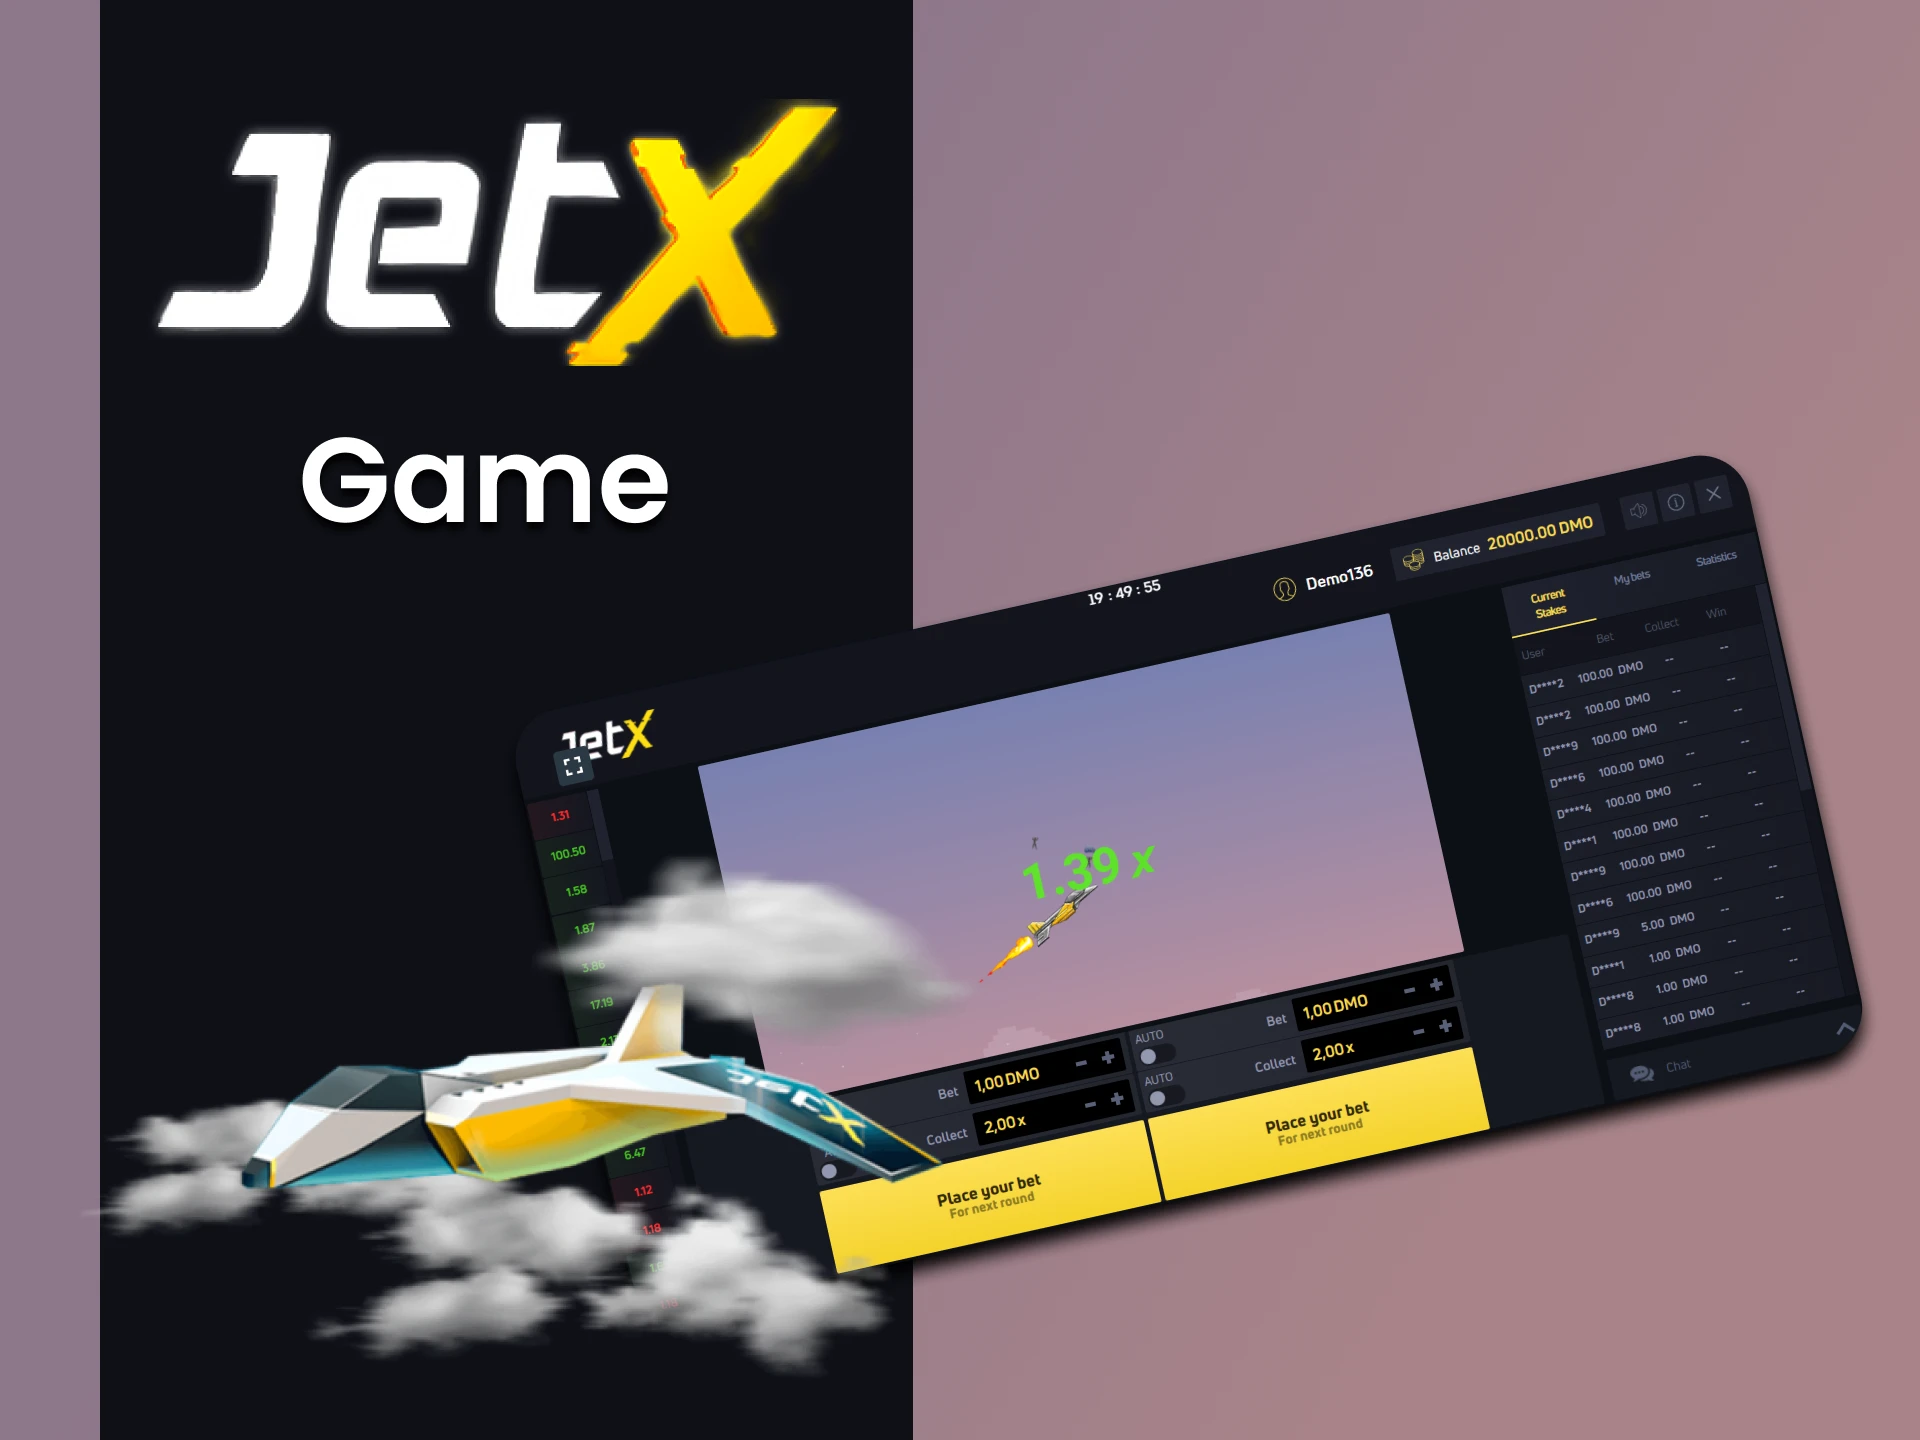 Learn all about the JetX game.